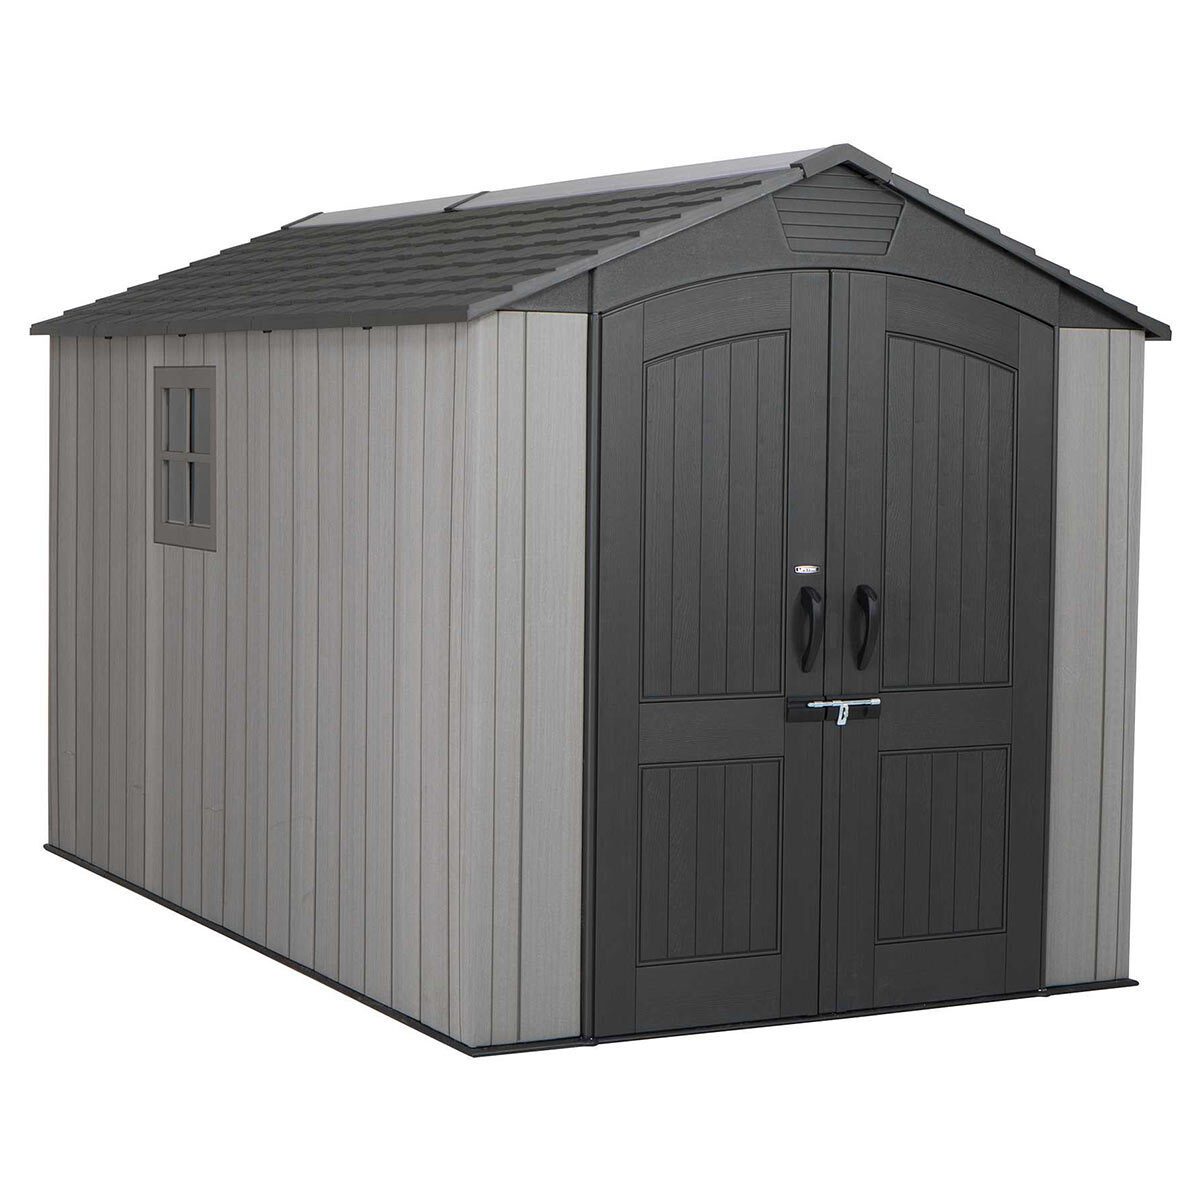 Lifetime 7ft x 12ft (2.1 x 3.7m) Simulated Wood Look Storage Shed With Windows - Signature Retail Stores